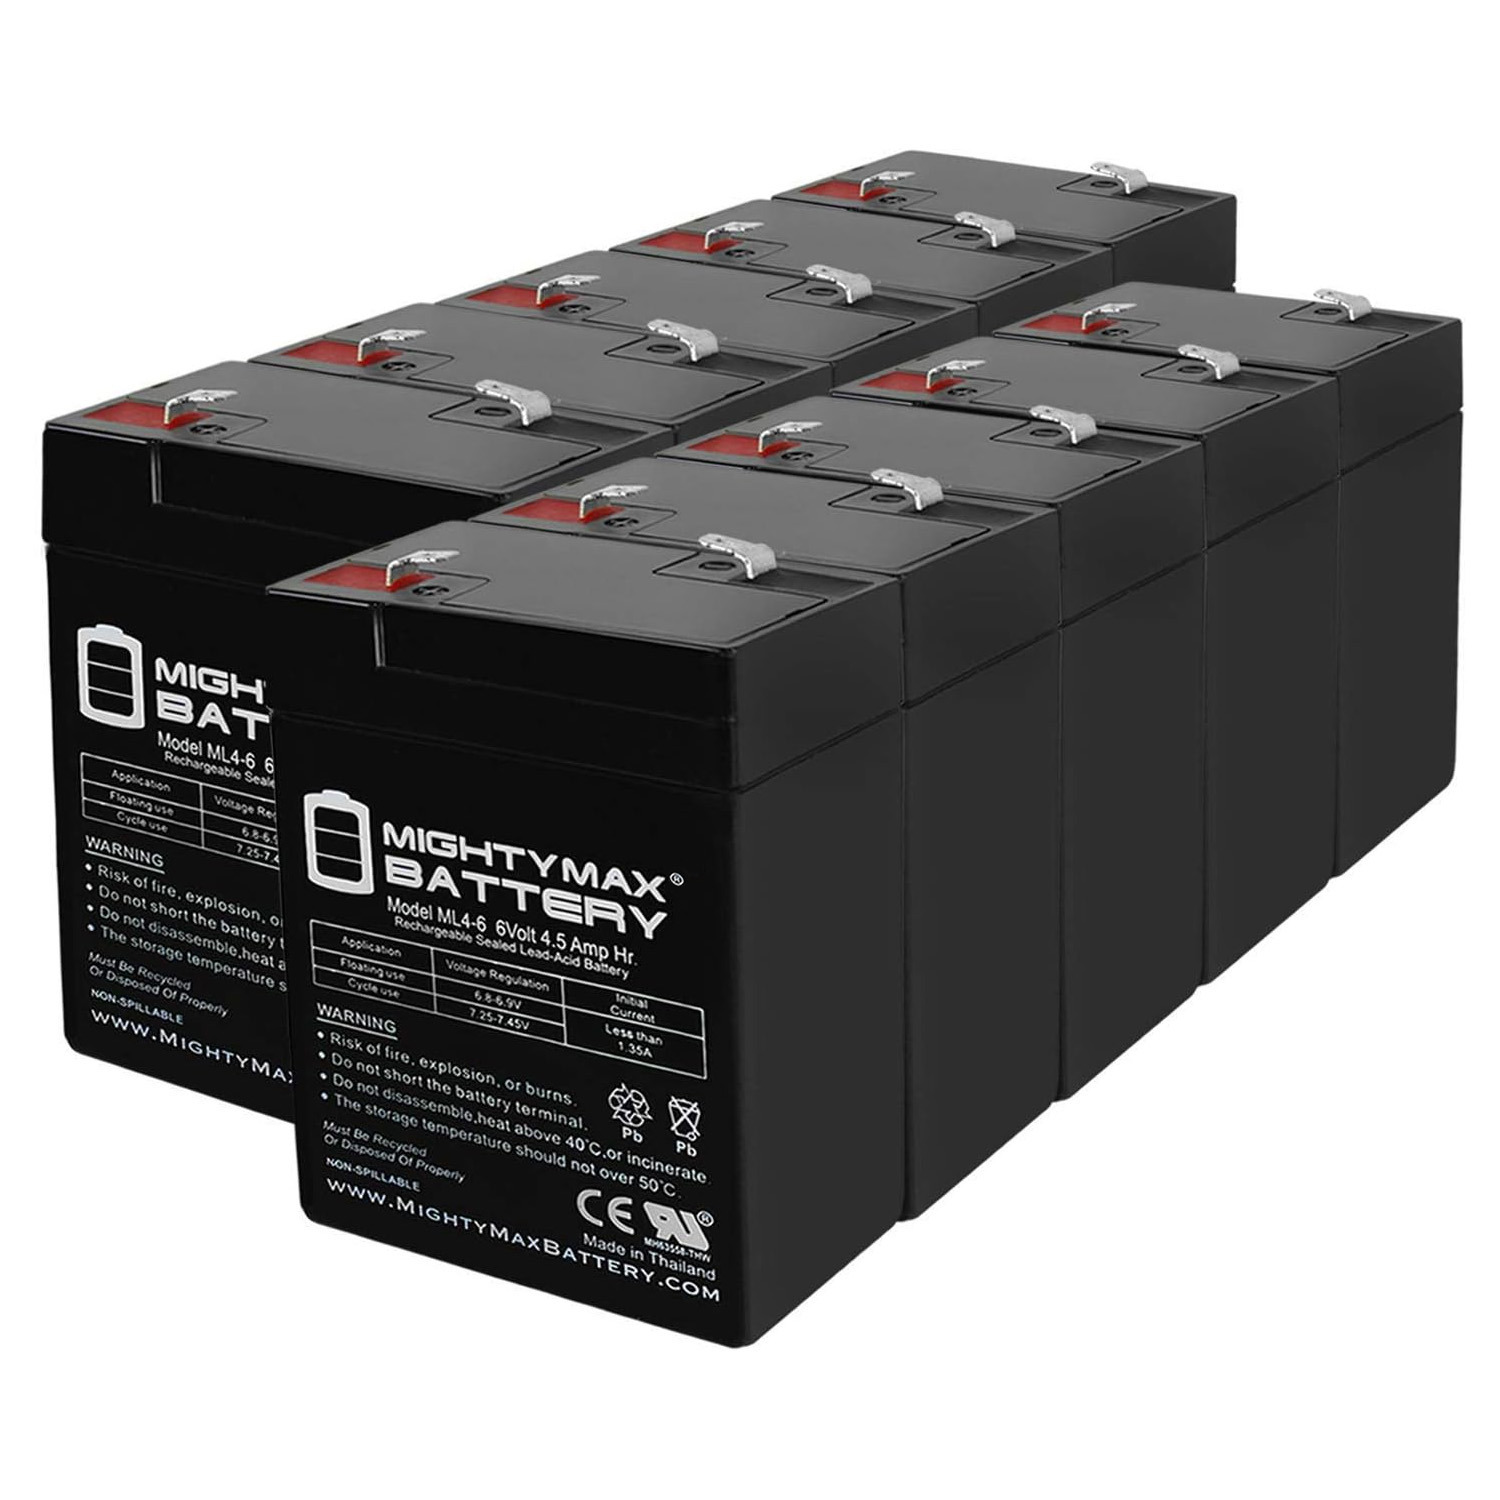 6V 4.5AH SLA Replacement Battery for Astralite EU-2-7 - 10 Pack